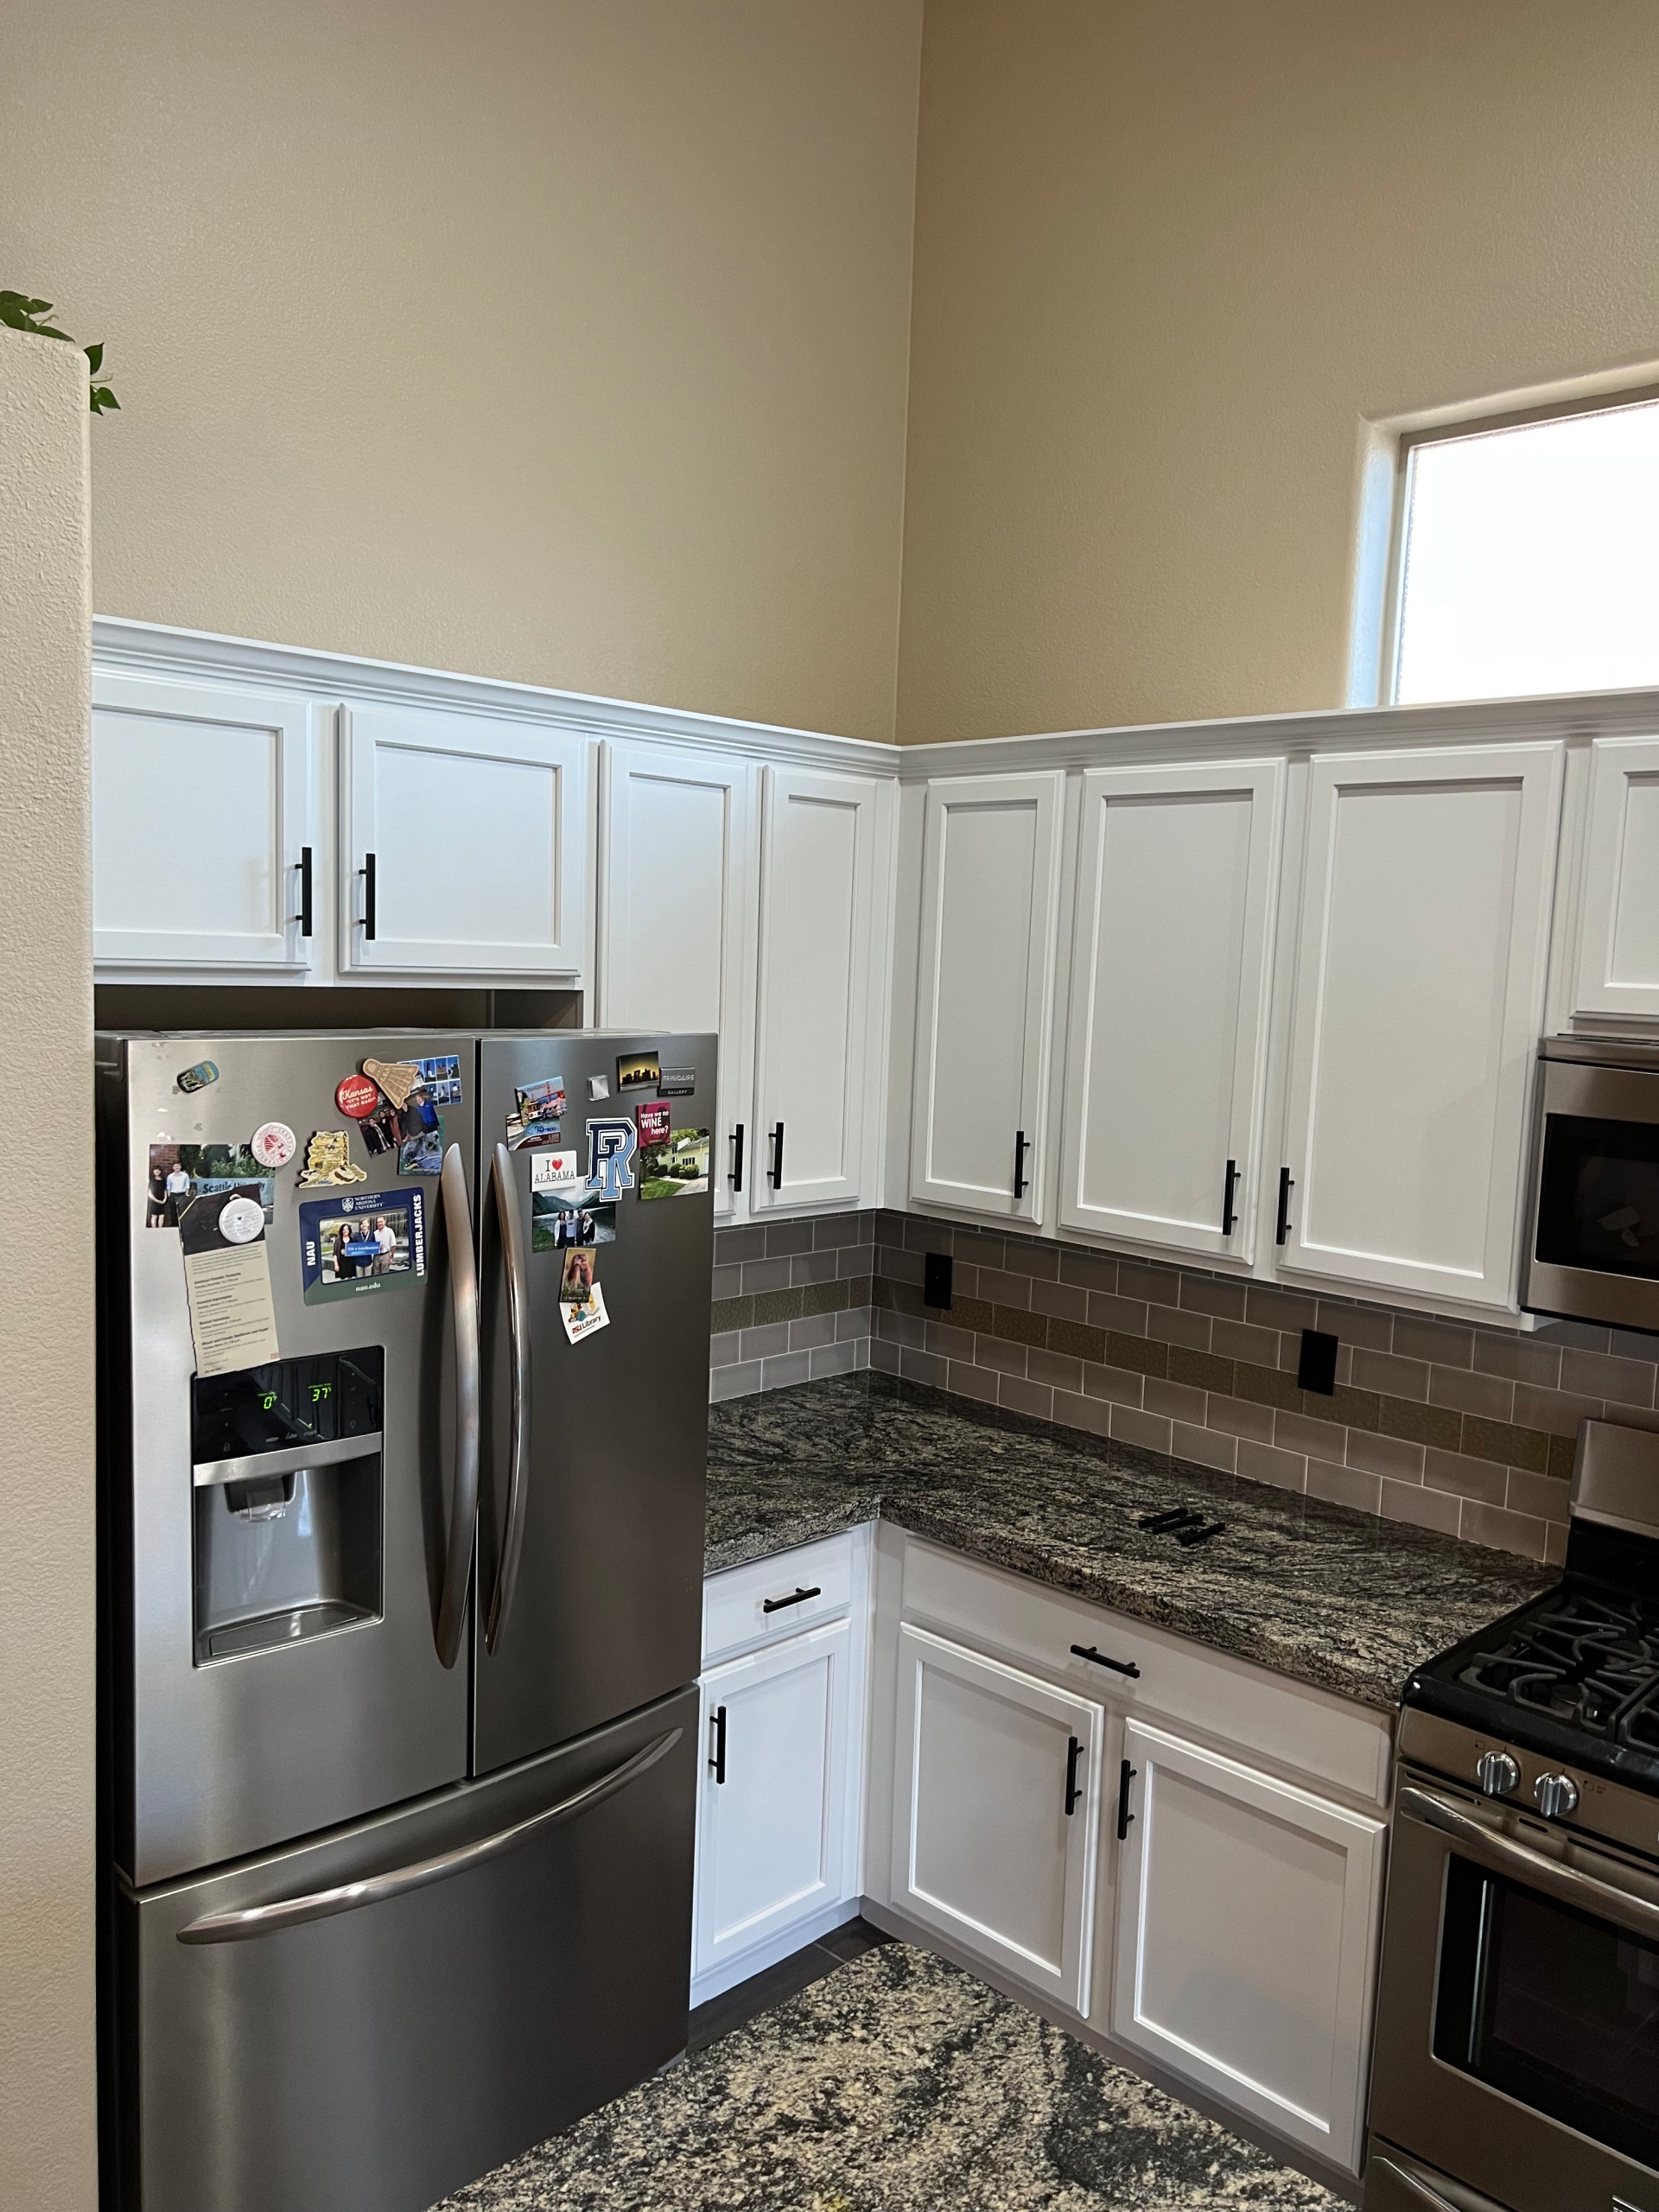 Kitchen and Island Paint